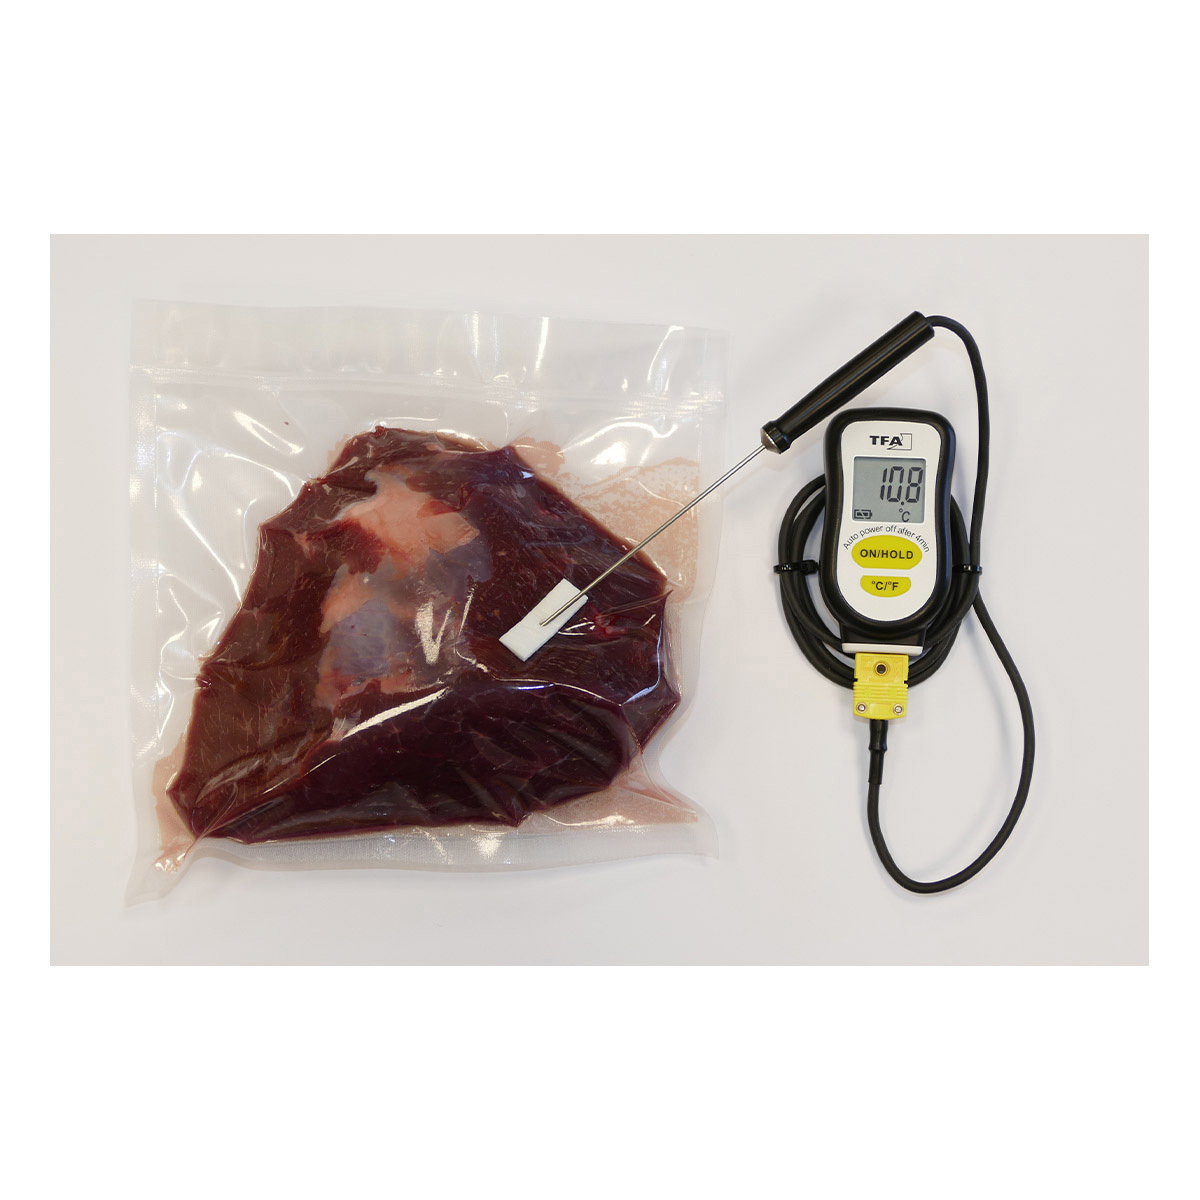 14-1552-01-digitales-sous-vide-thermometer-anwendung-1200x1200px.jpg